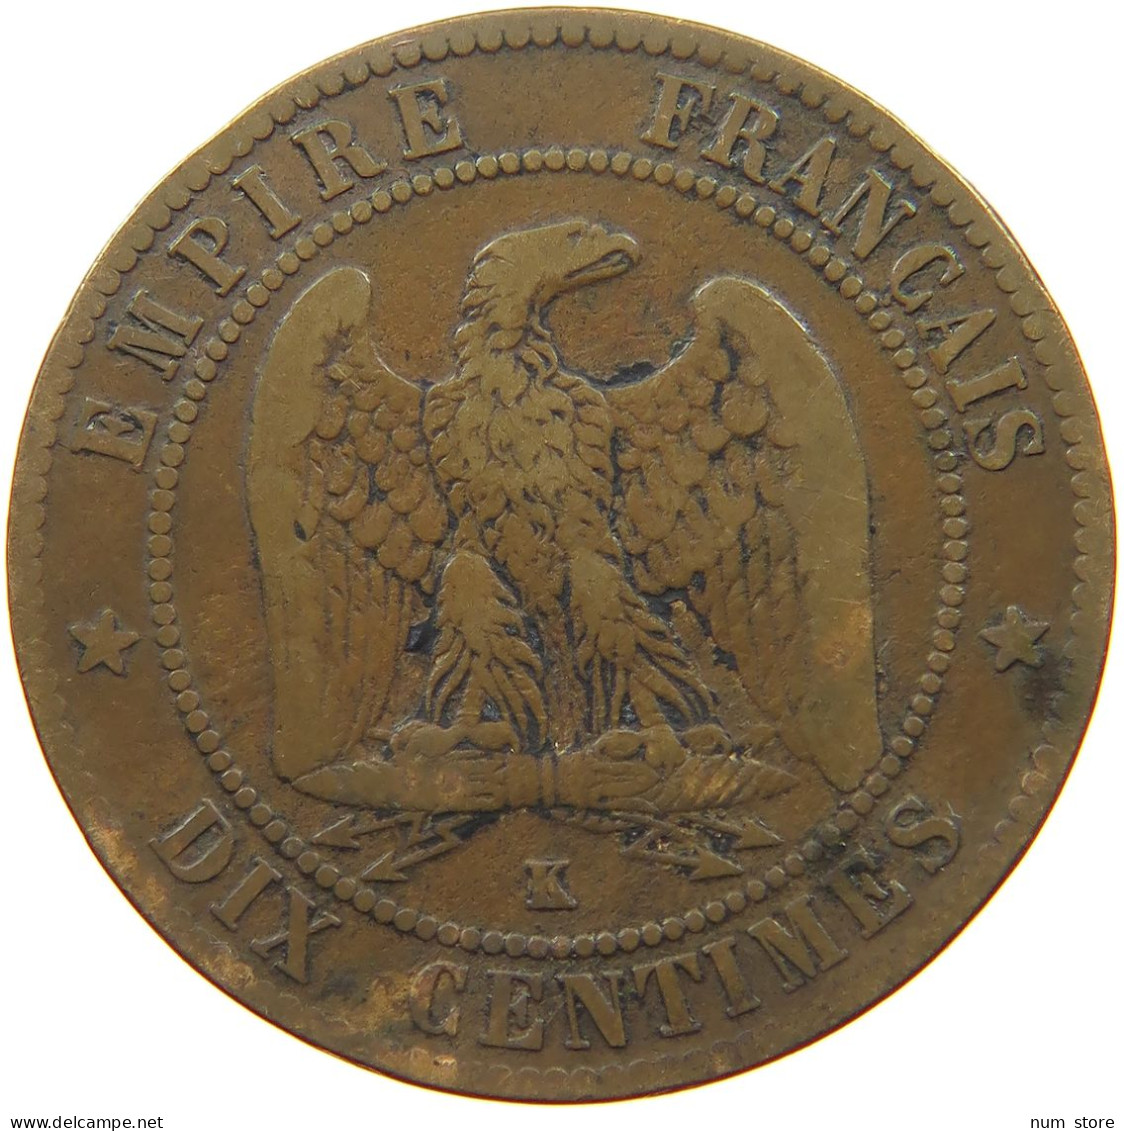 FRANCE 10 CENTIMES 1864 K Napoleon III. (1852-1870) #s077 0033 - 10 Centimes